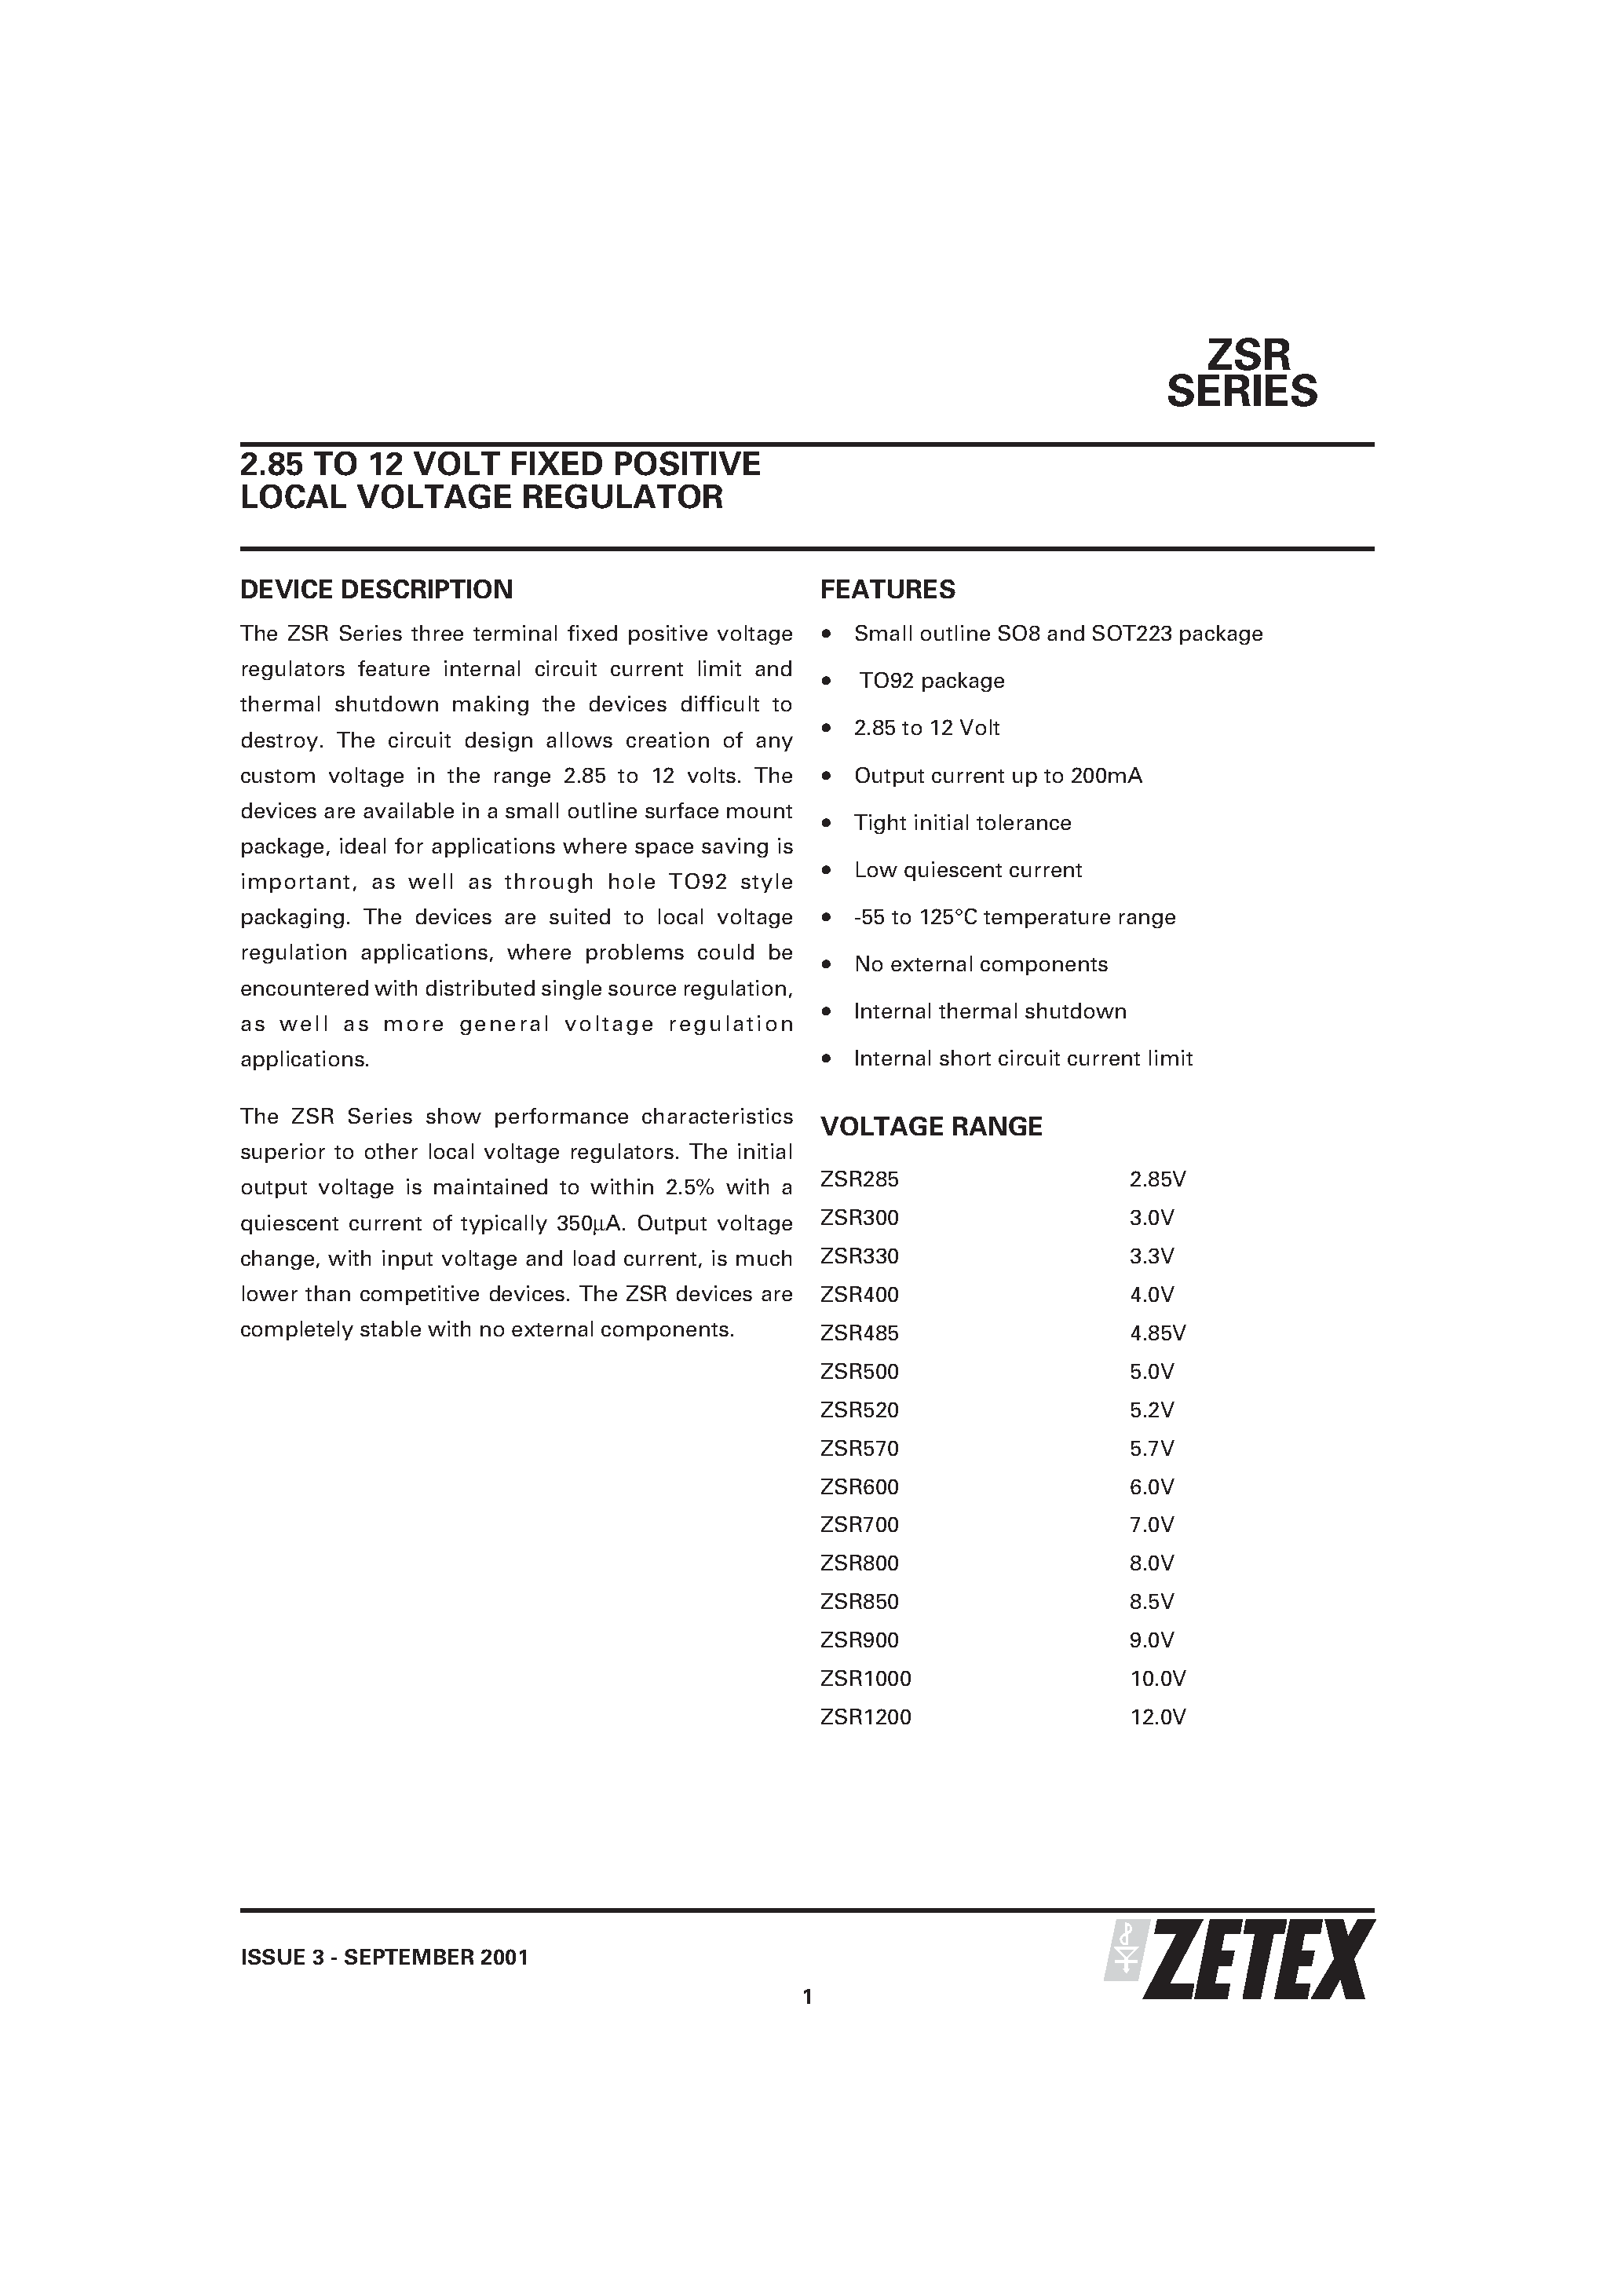 Datasheet ZSR800N8 - 2.85 TO 12 VOLT FIXED POSITIVE LOCAL VOLTAGE REGULATOR page 1